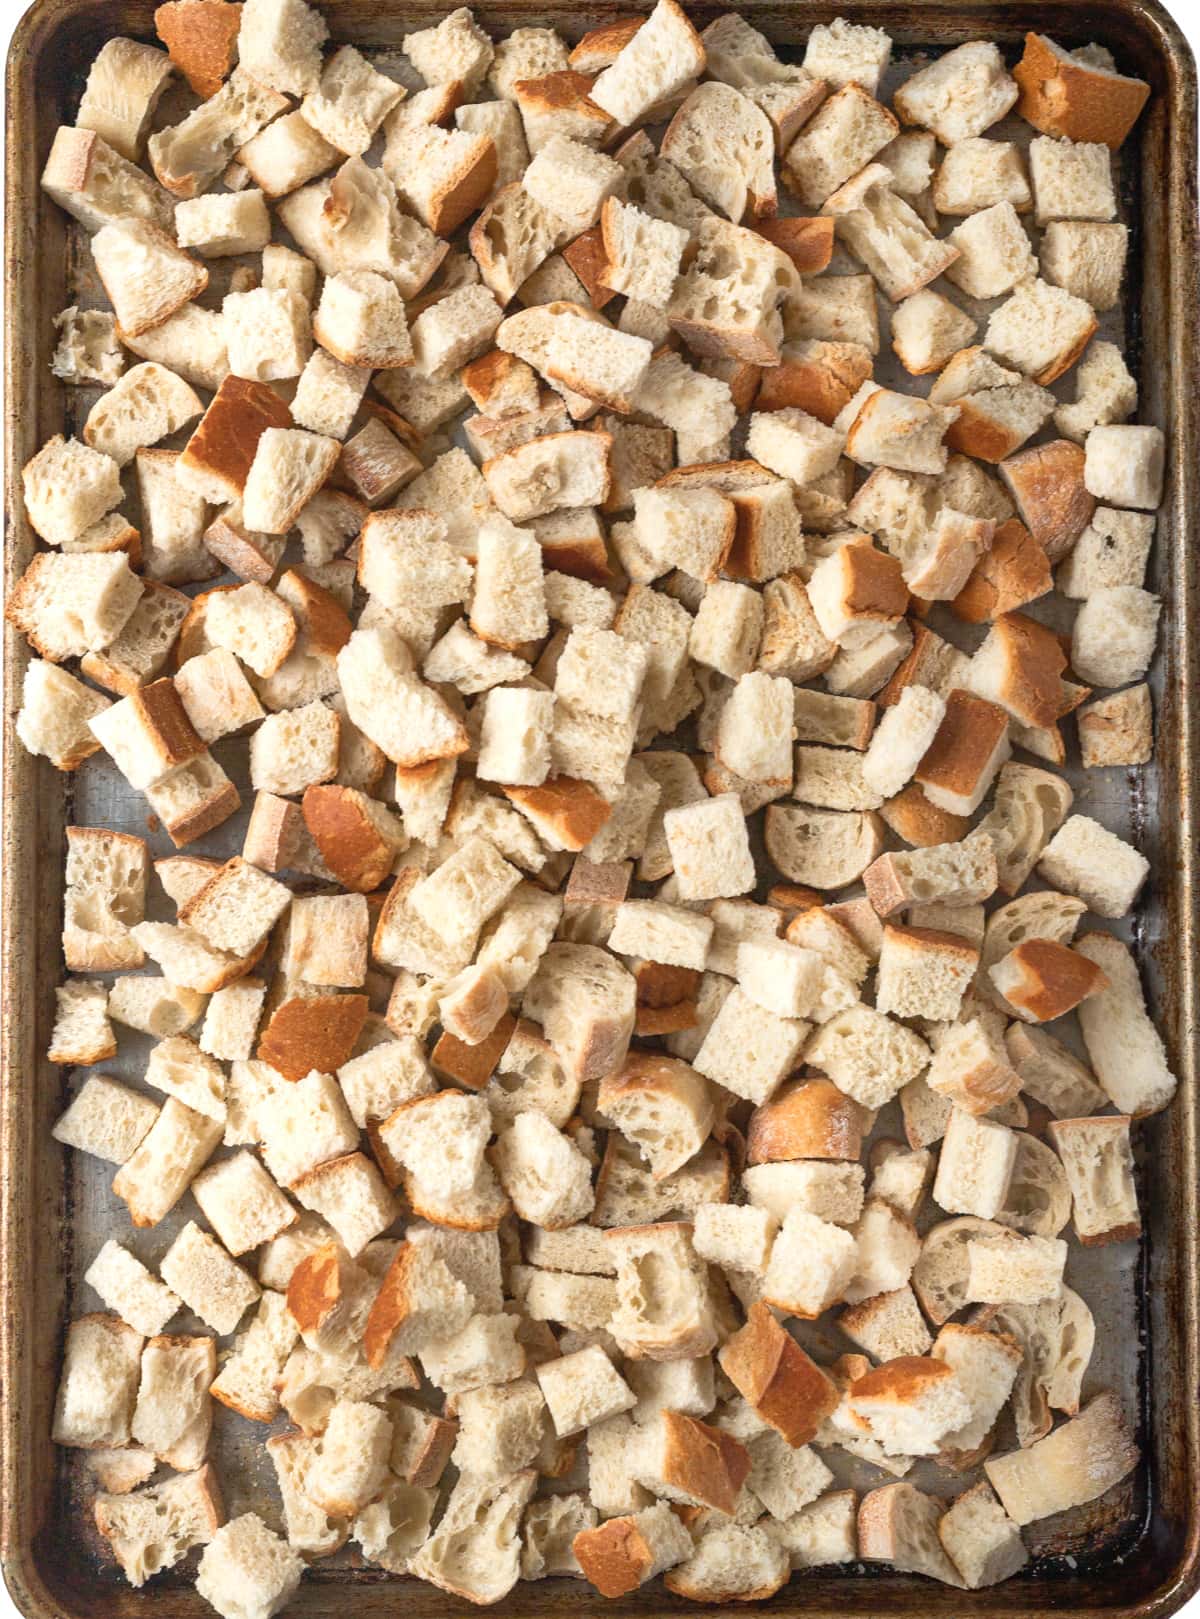 Bread cubes on a large baking sheet.